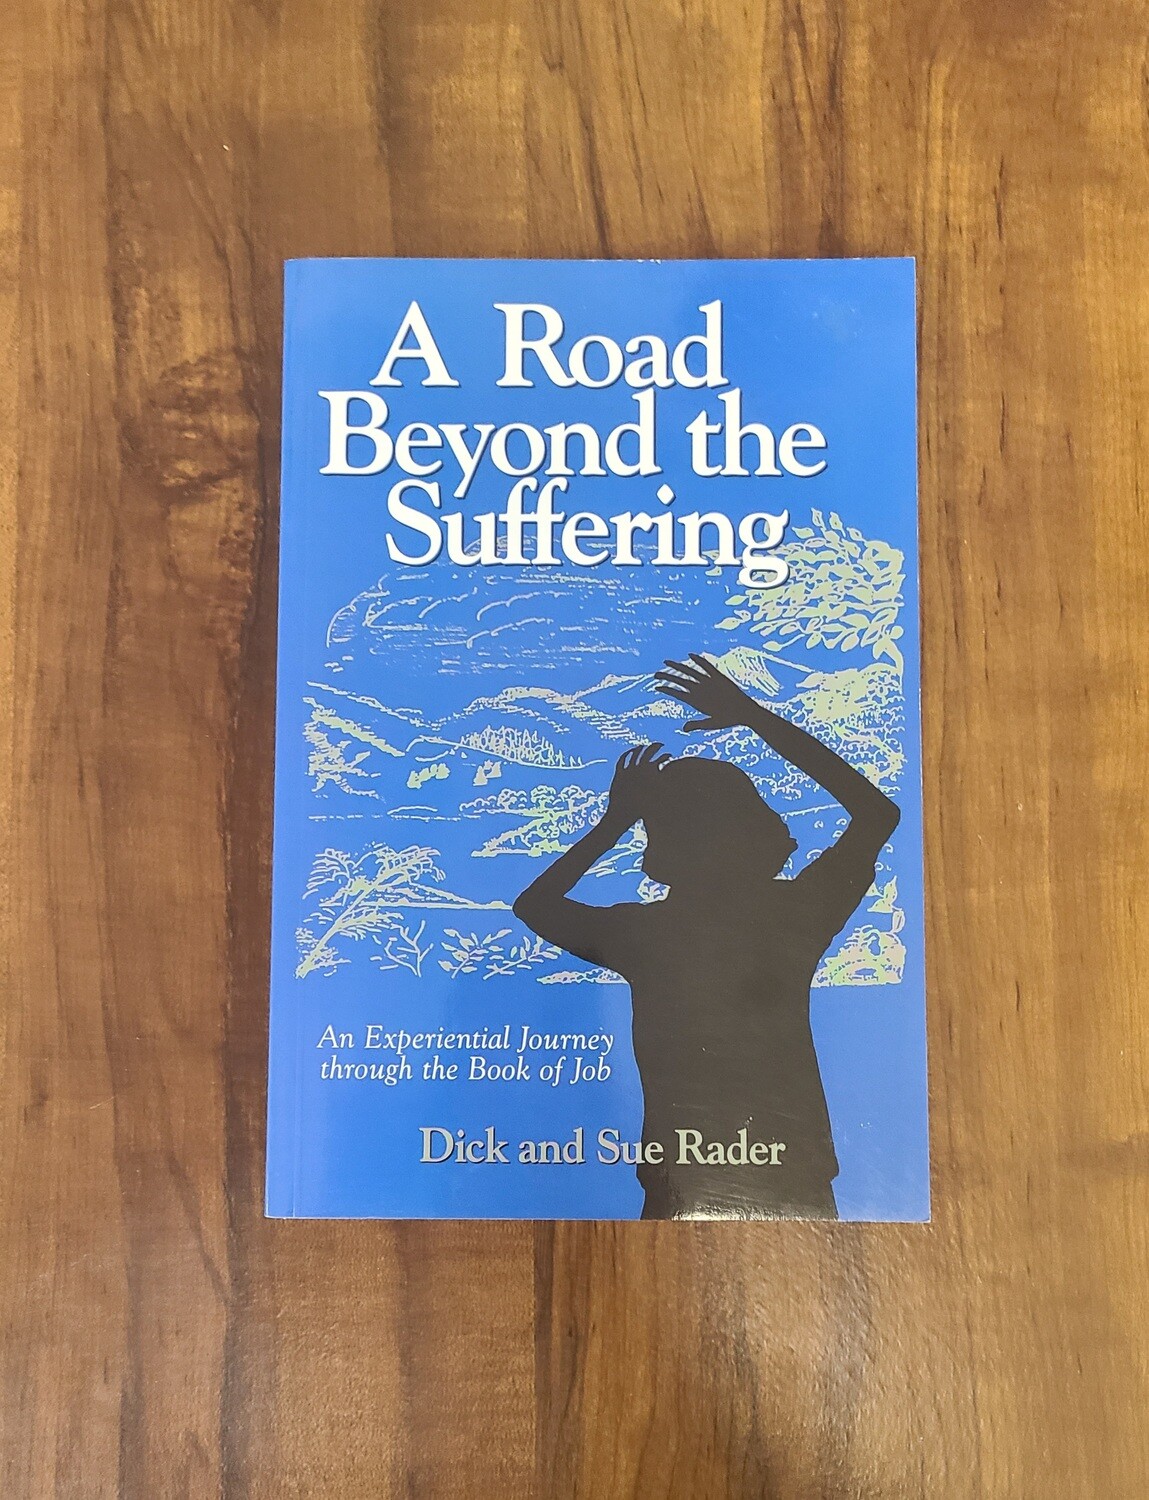 A Road Beyond the Suffering by Dick and Sue Rader